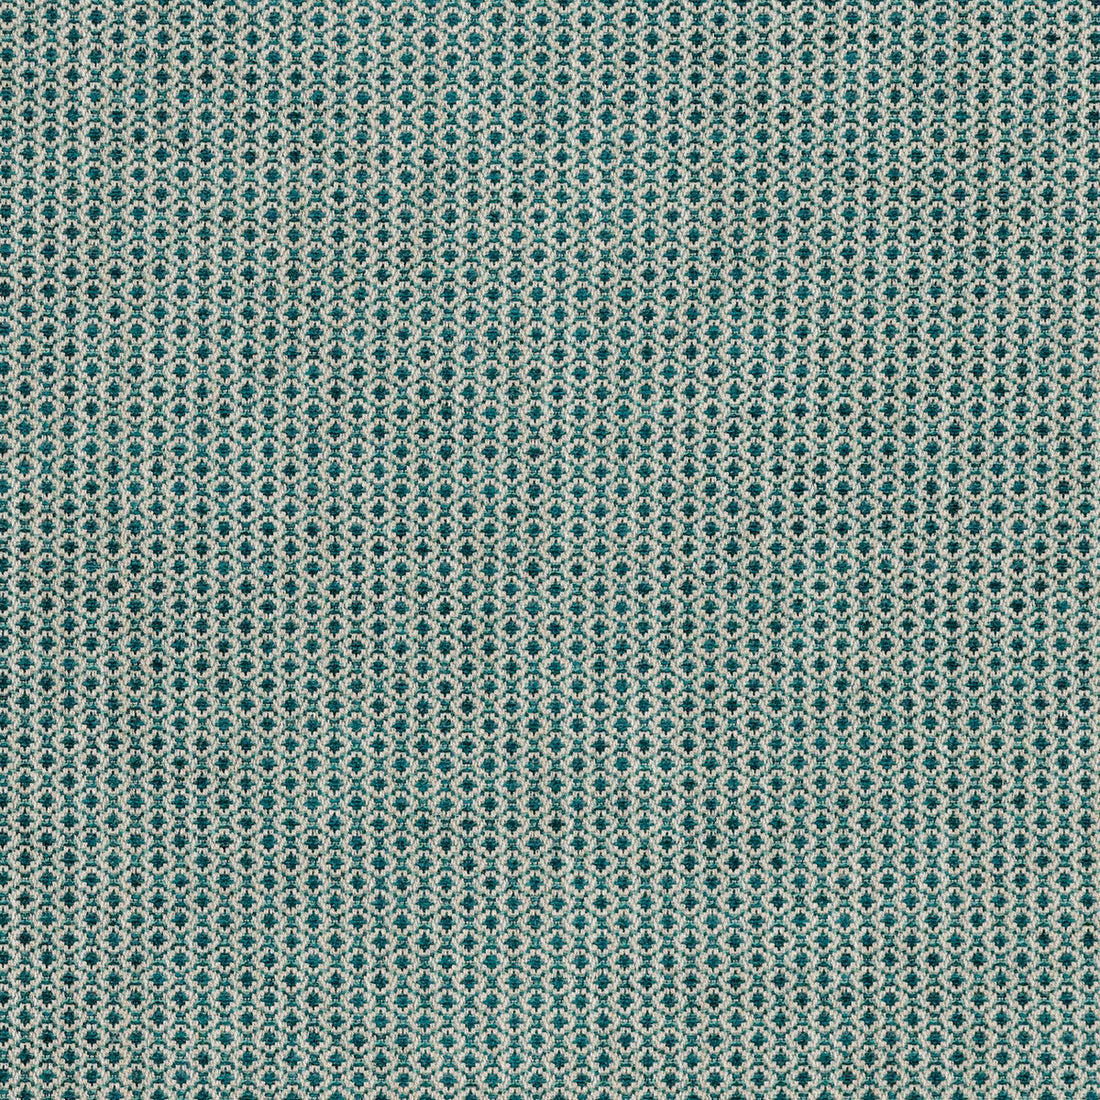 Cosgrove fabric in jade color - pattern BFC-3672.35.0 - by Lee Jofa in the Blithfield collection